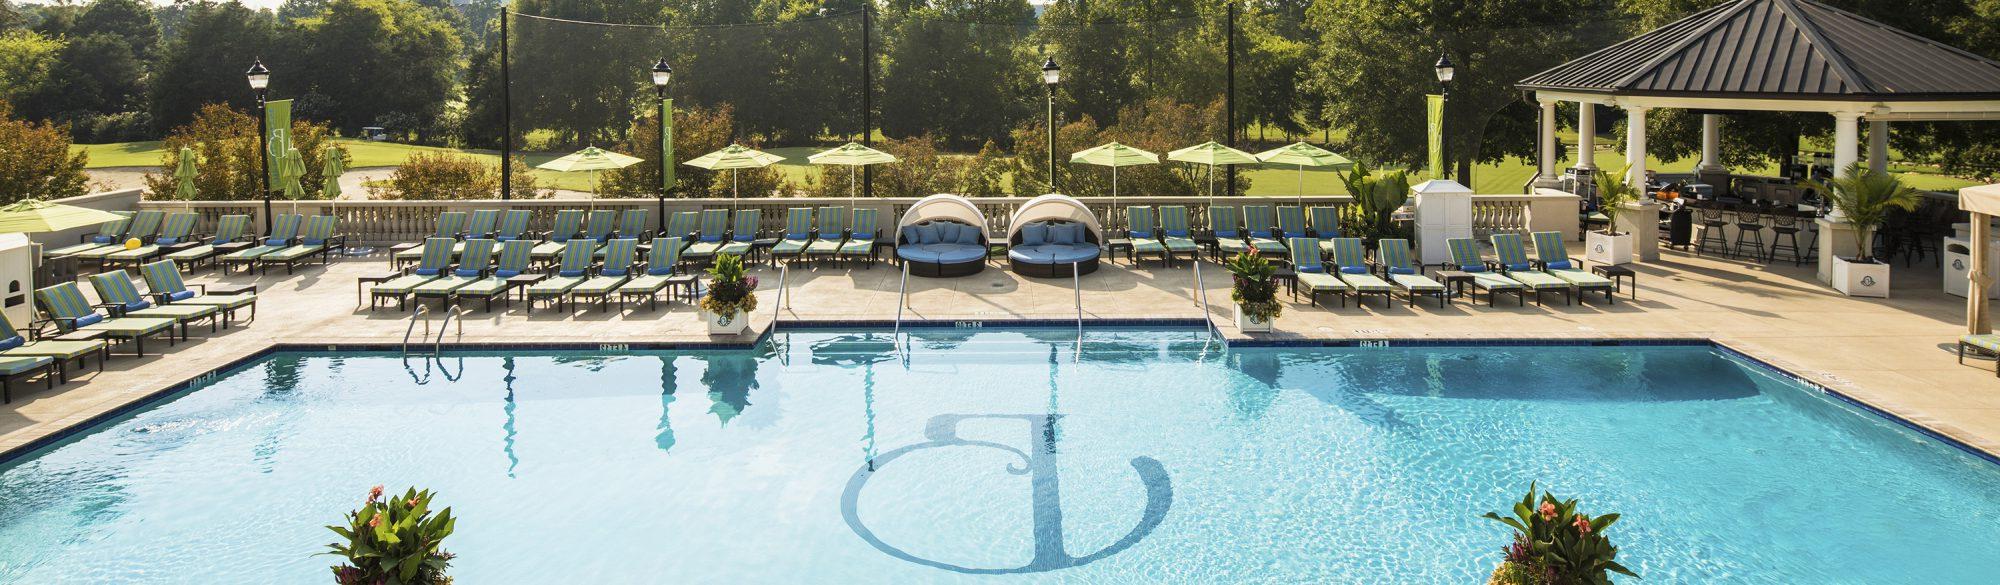 Outdoor Pool at The Ballantyne, Charlotte